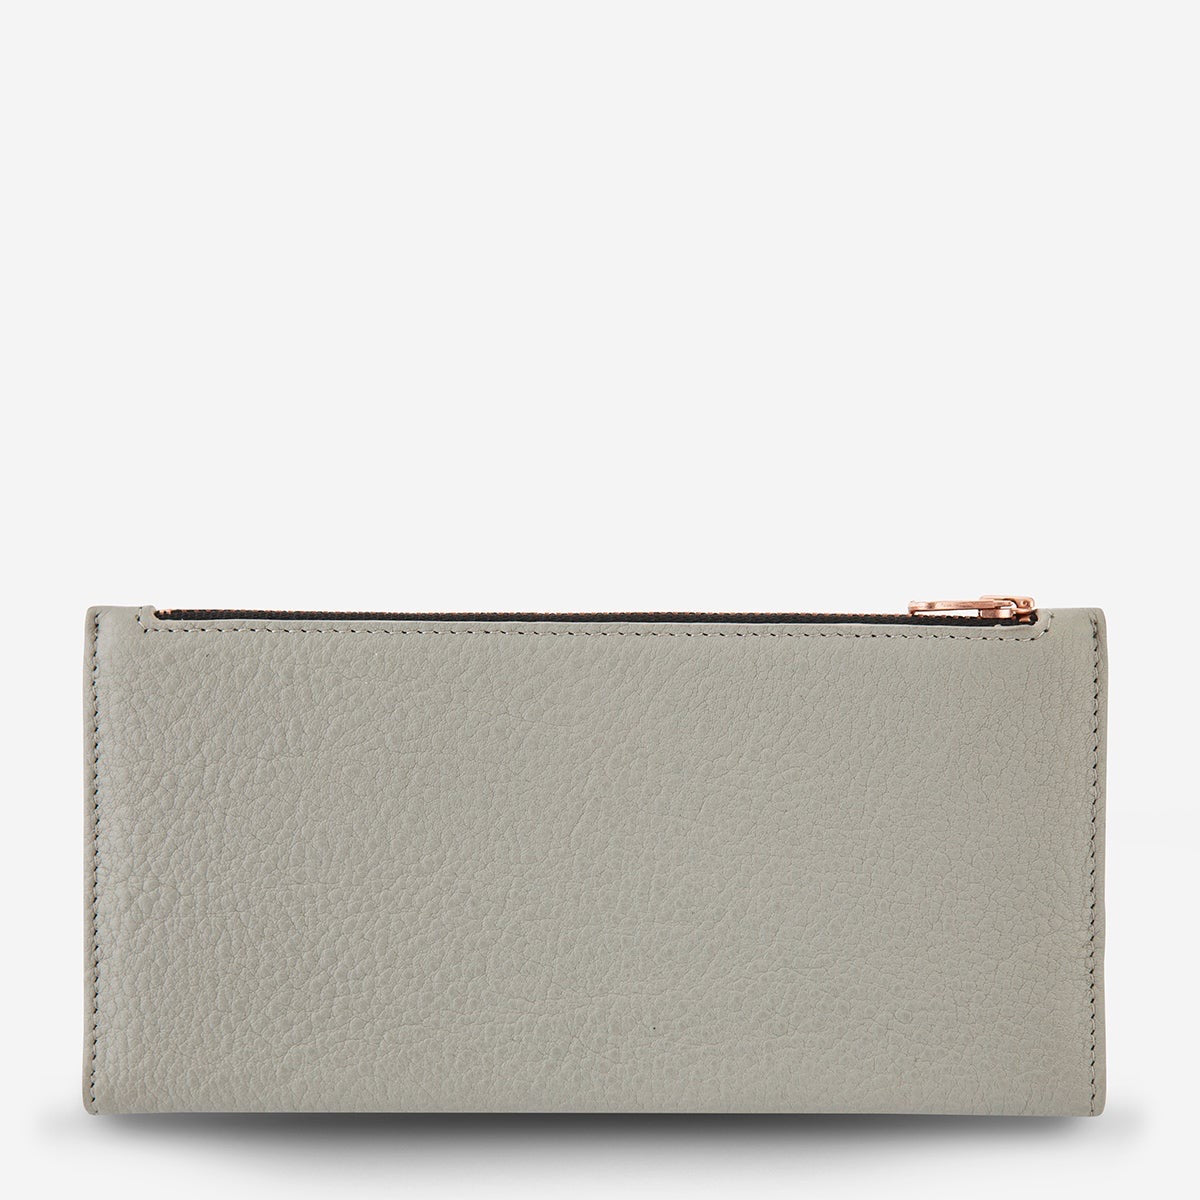 In The Beginning Leather Wallet - Light Grey